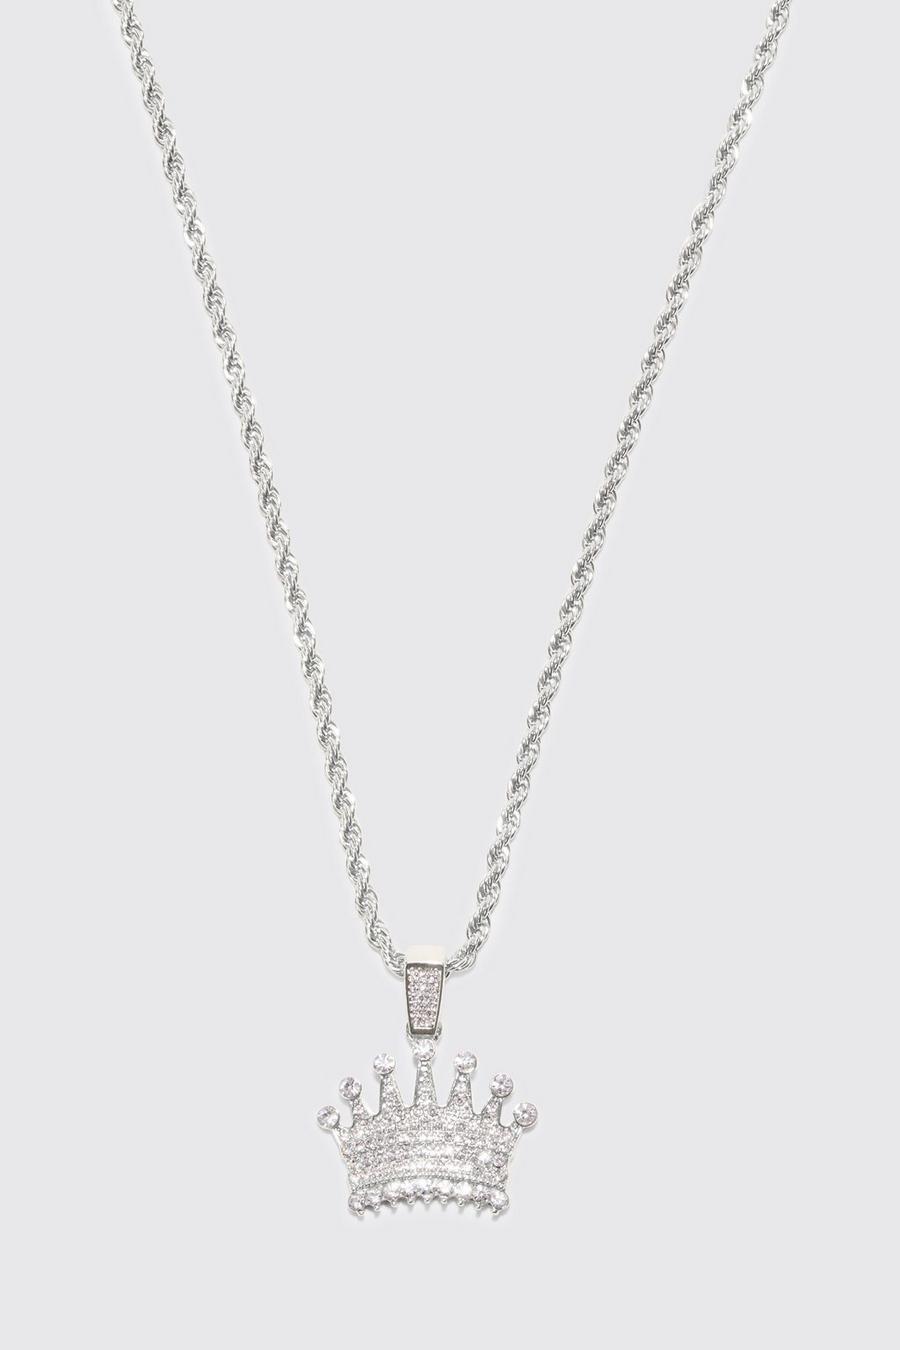 Silver Rope Chain Necklace With Iced Crown